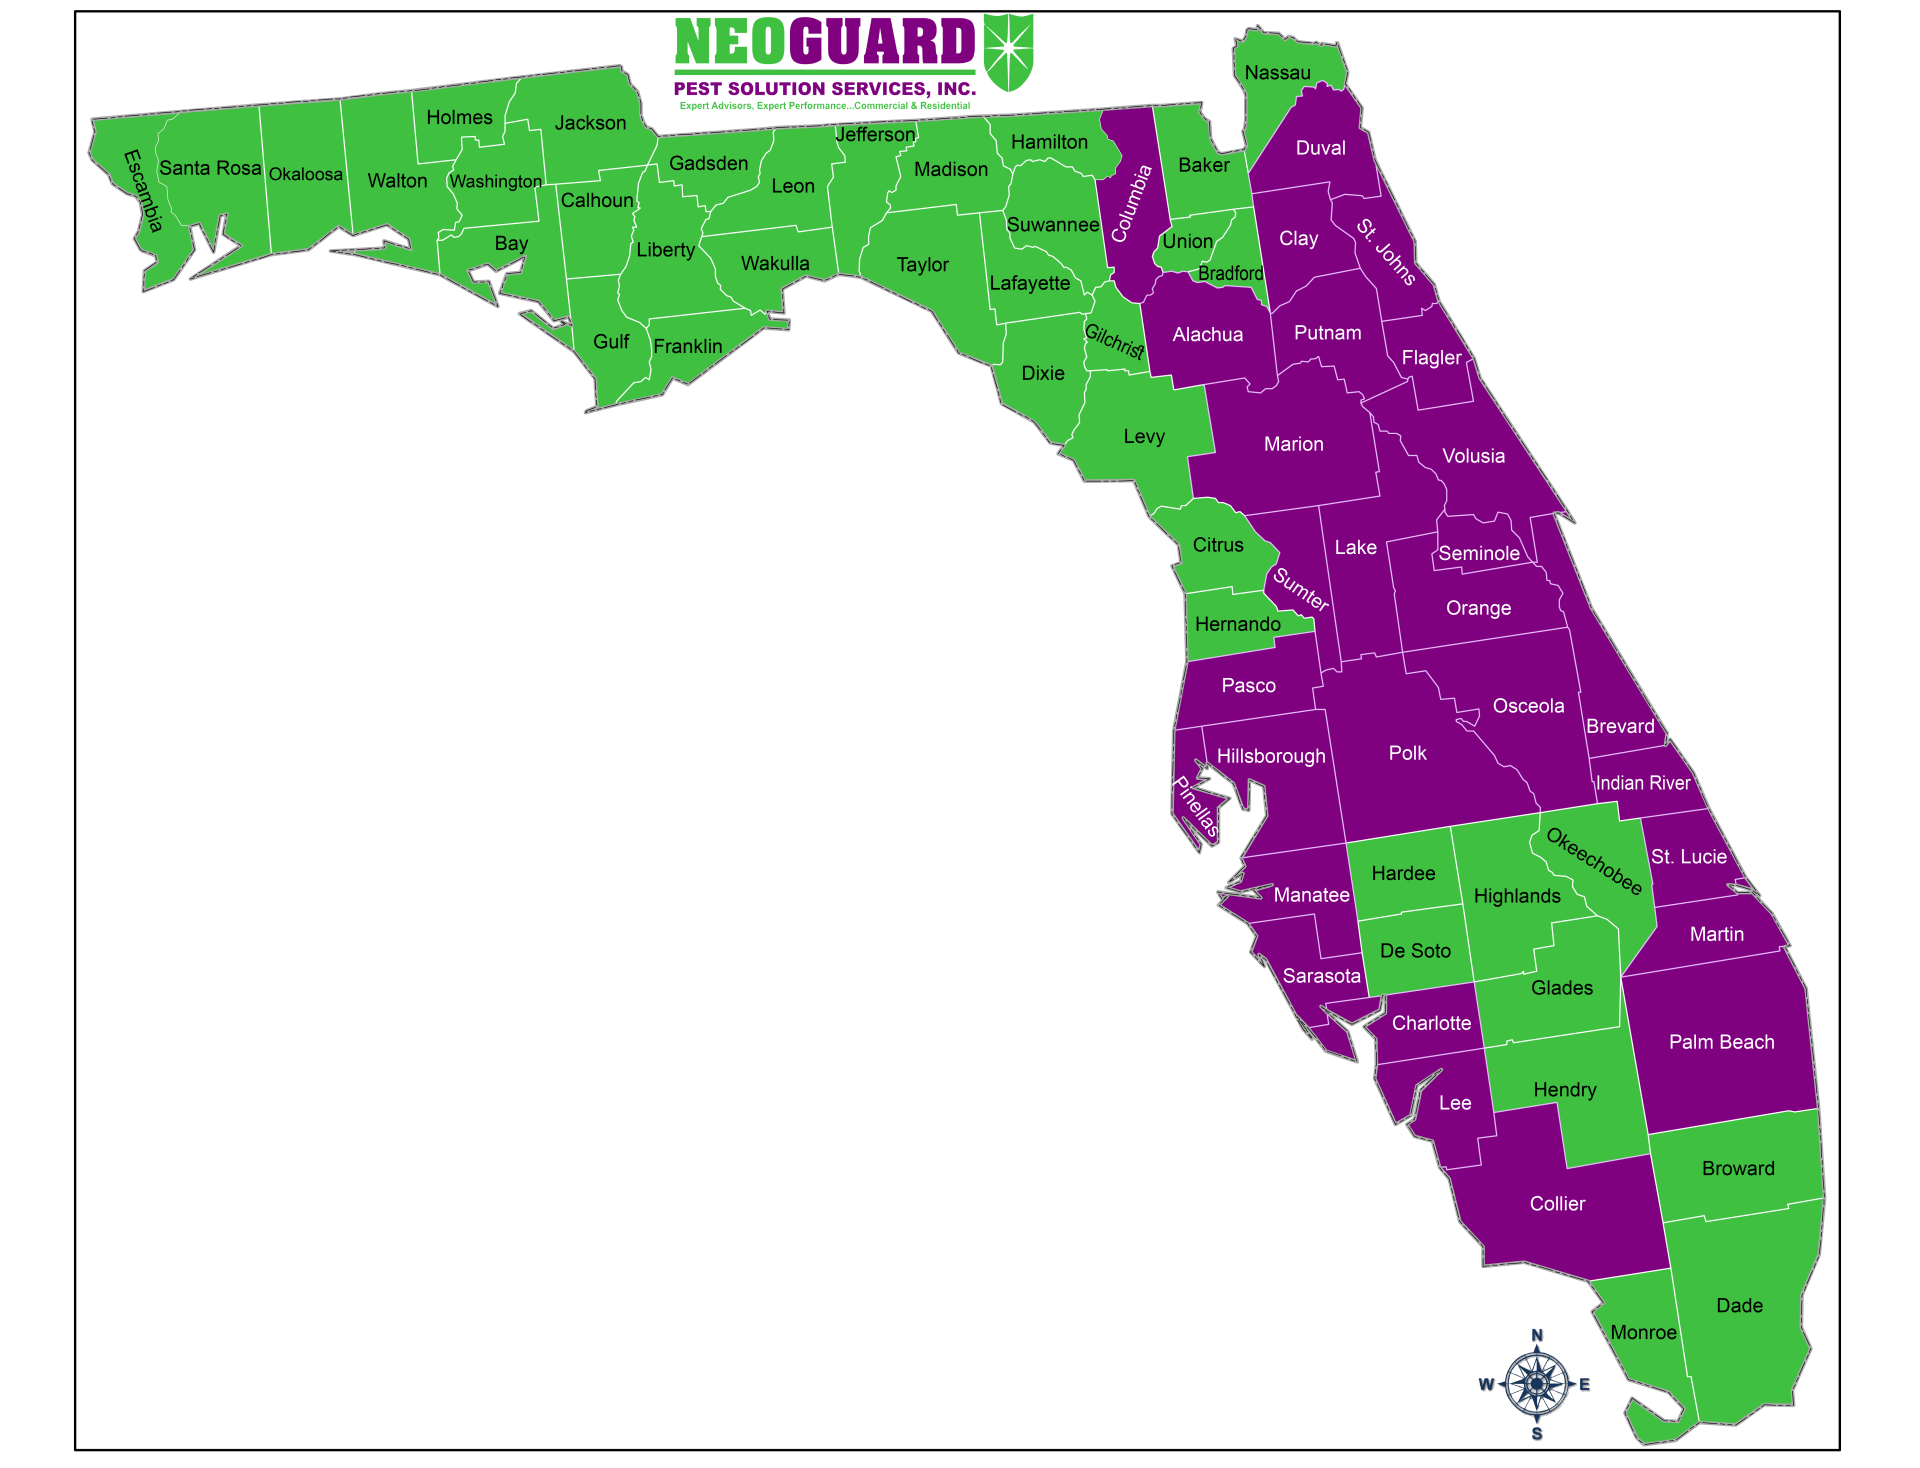 A map of Florida with purple and green areas, displaying Neoguard purple areas served.